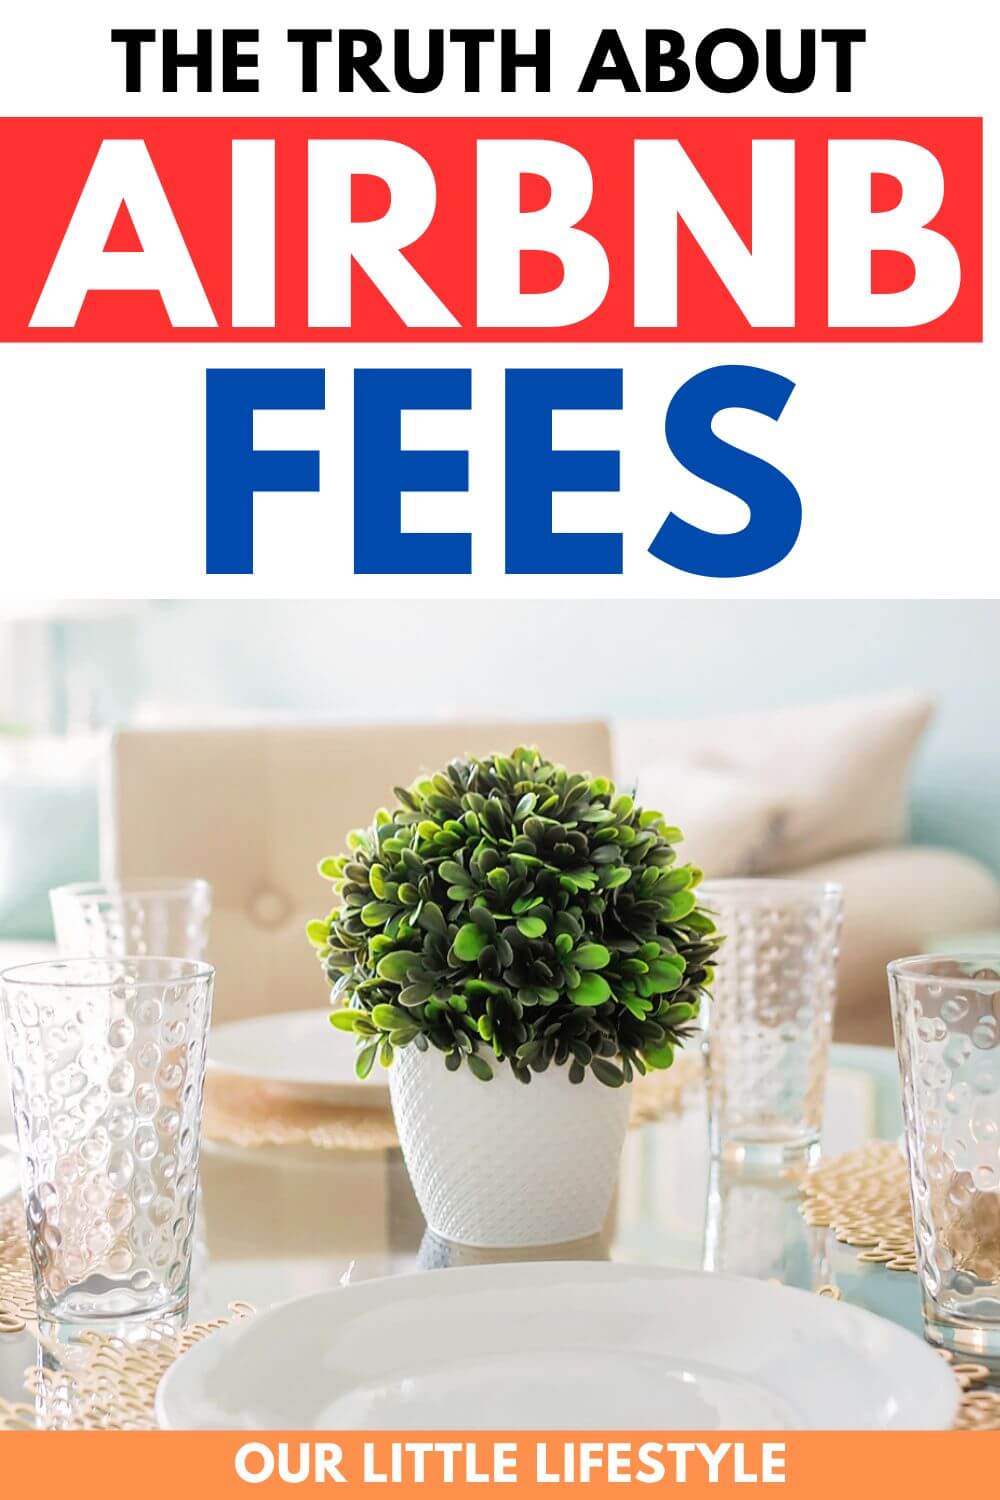 What are all of the Airbnb Fees and charges